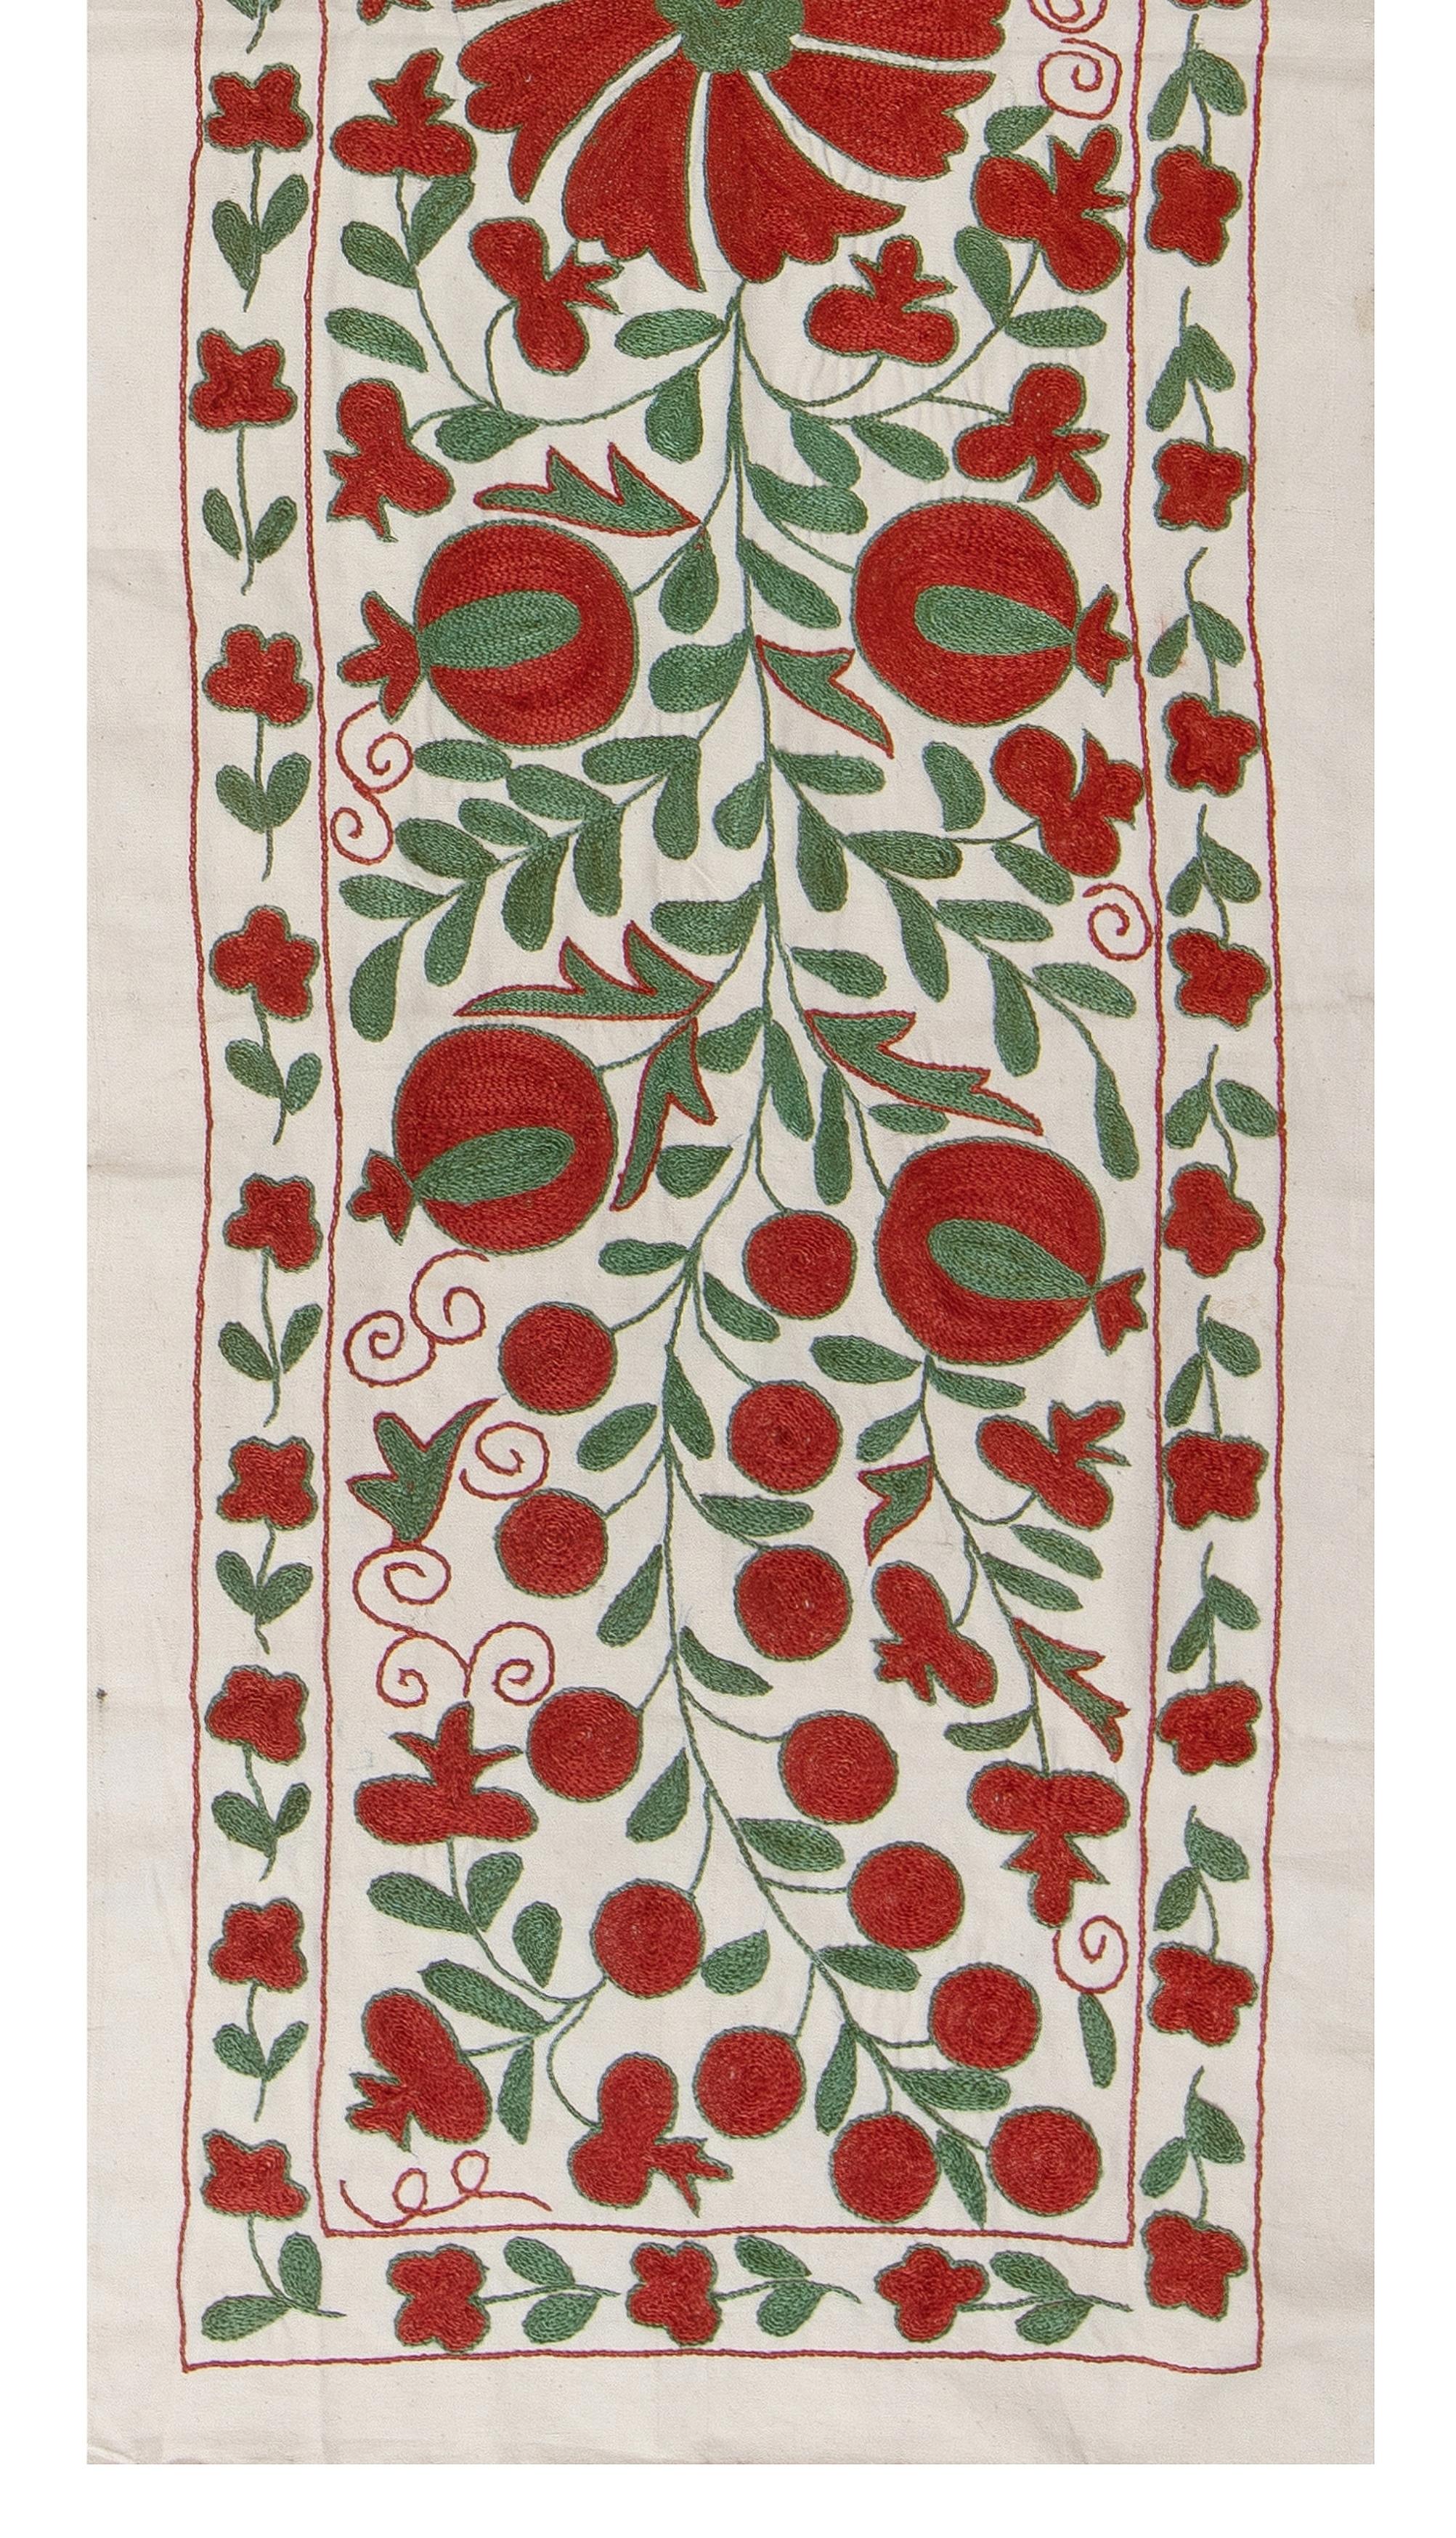 Uzbek 1.7x6.2 Ft Suzani Embroidered Cotton & Silk Wall Hanging, Decorative Tablecloth For Sale